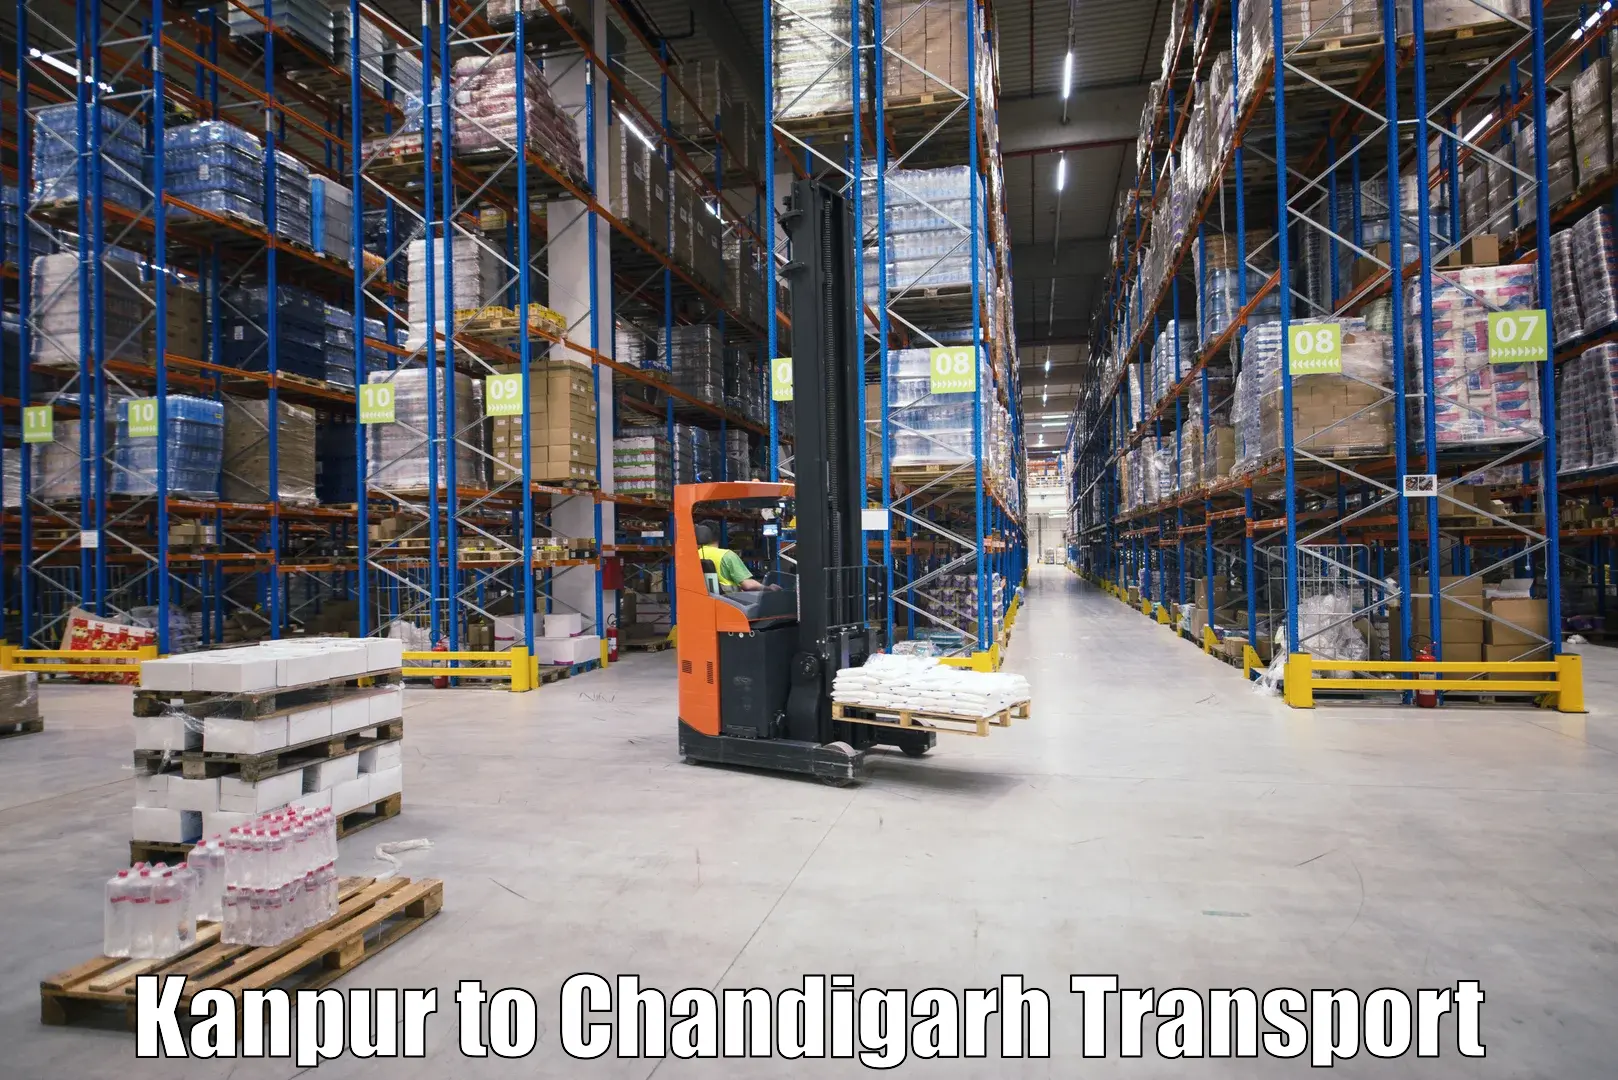 Container transport service Kanpur to Chandigarh